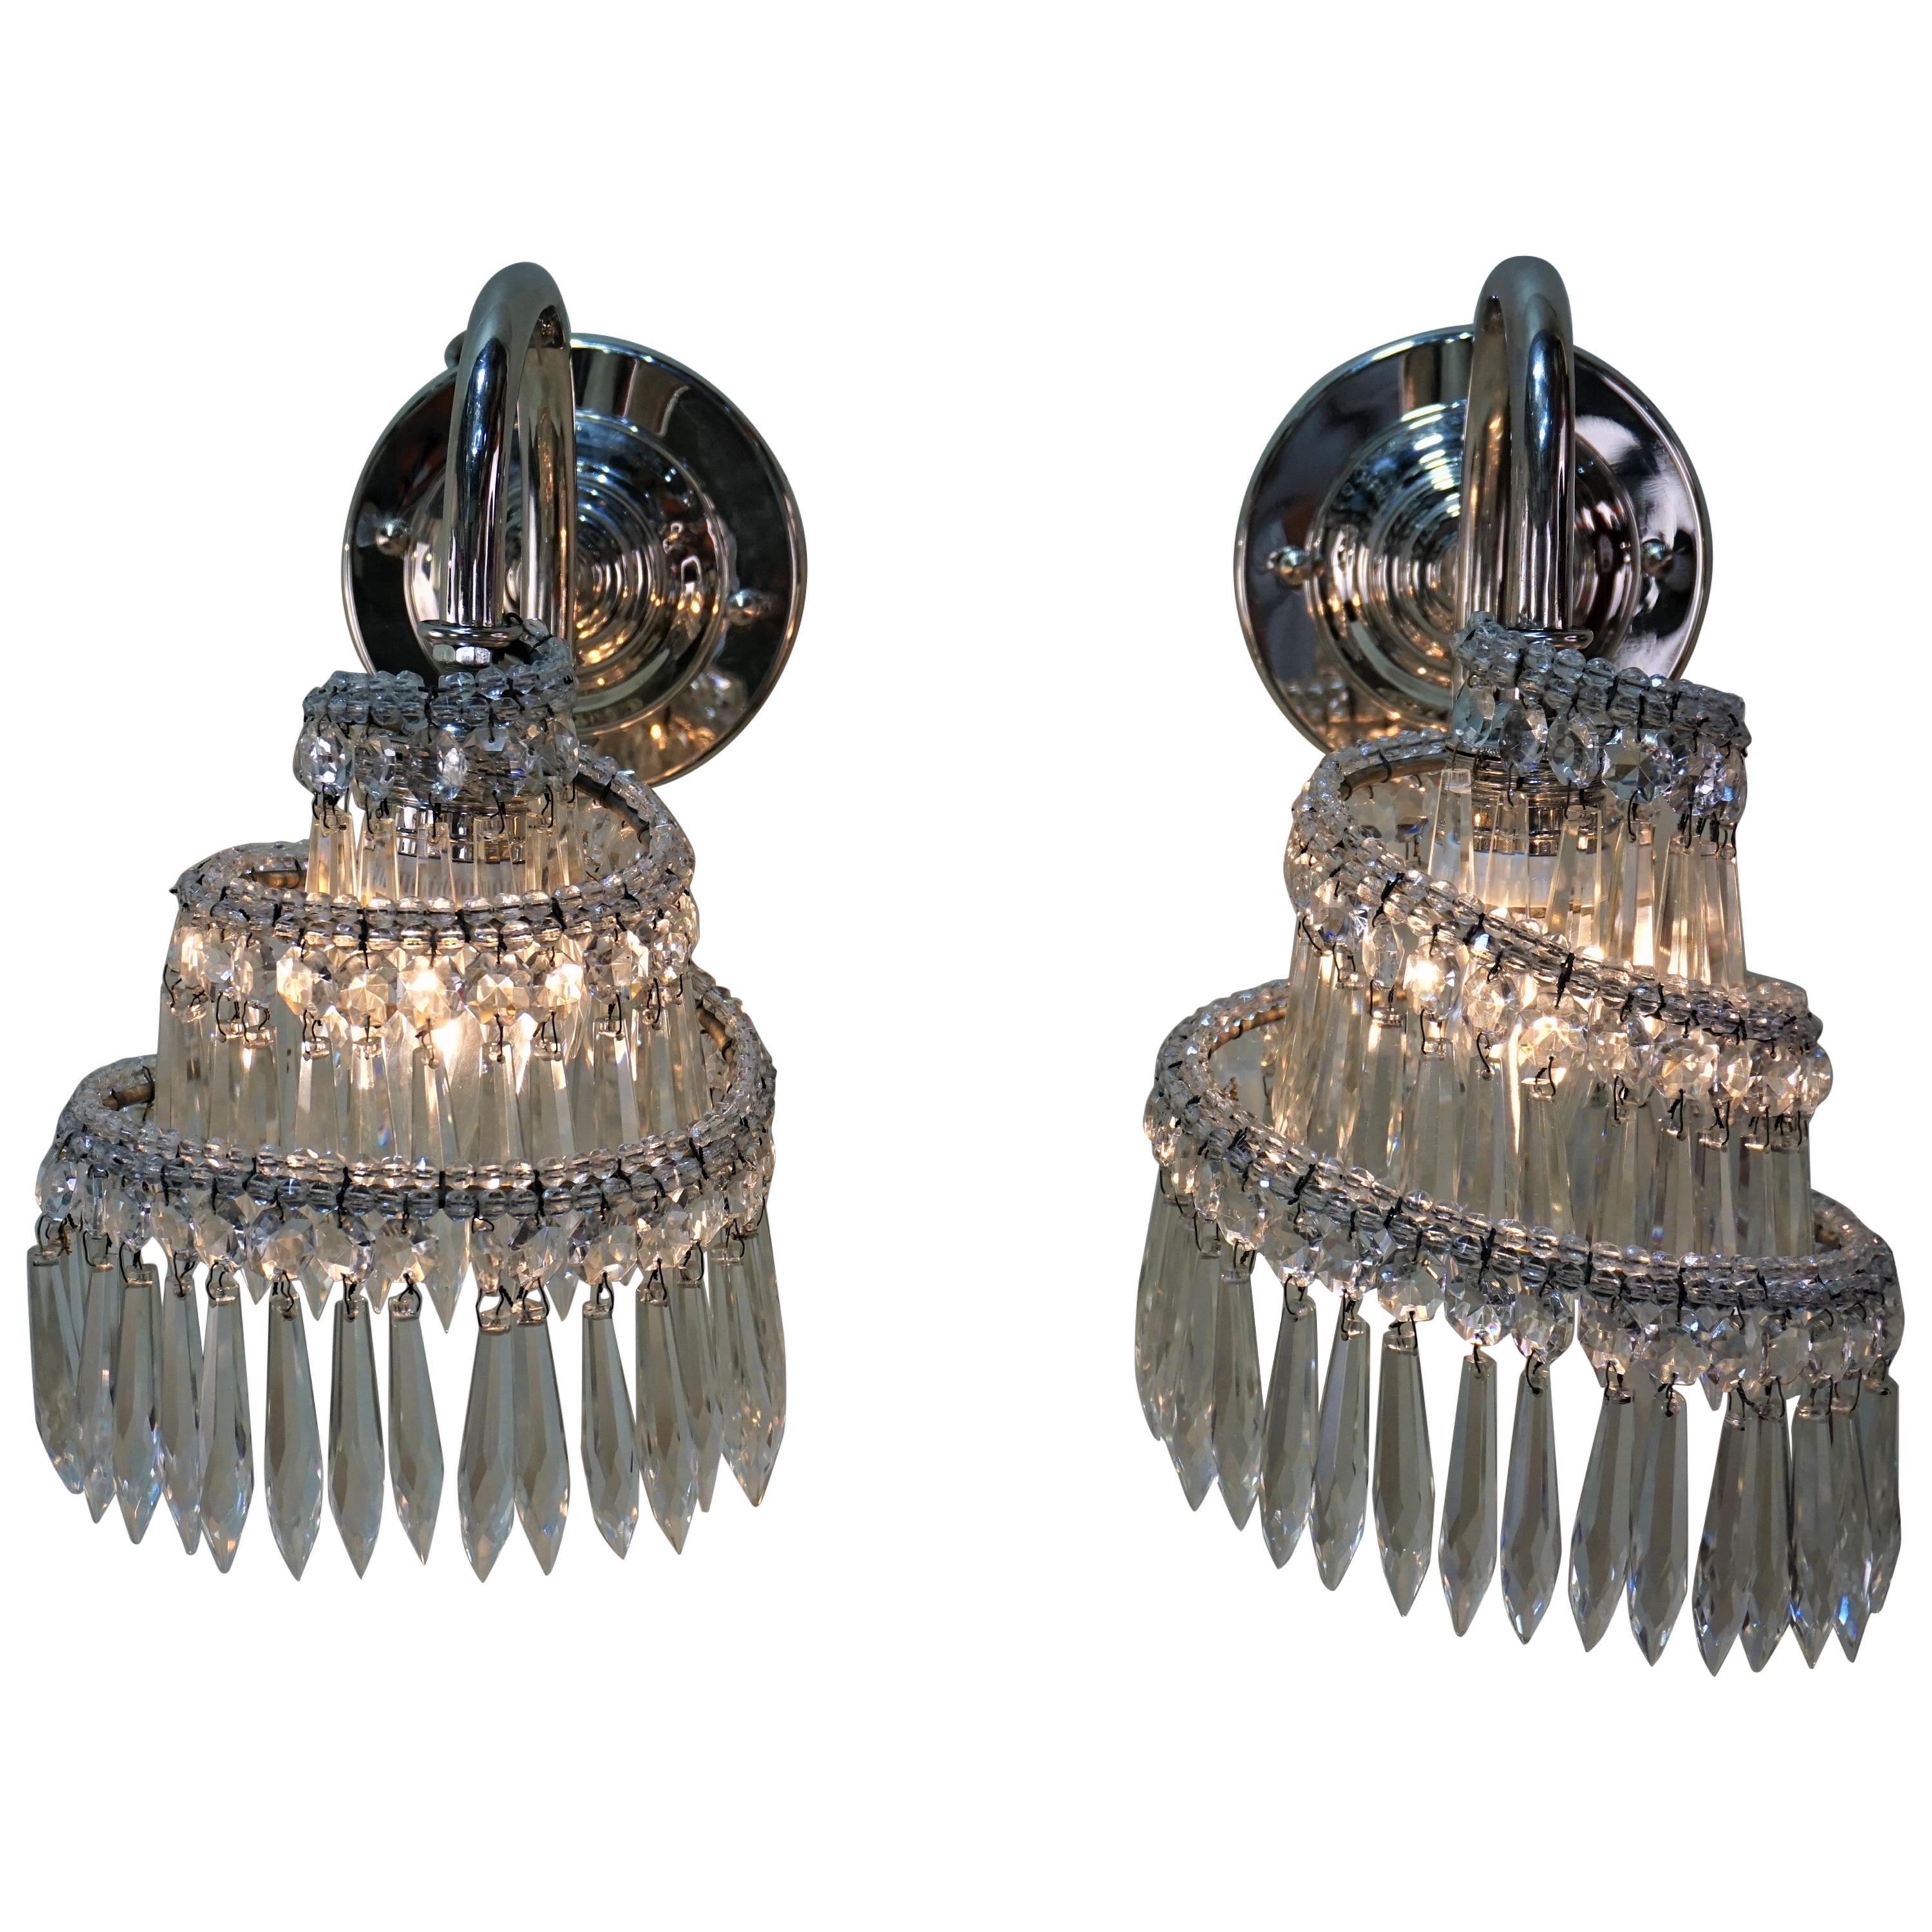 Pair of 1930s Nickel and Crystal French Art Deco Wall Sconces